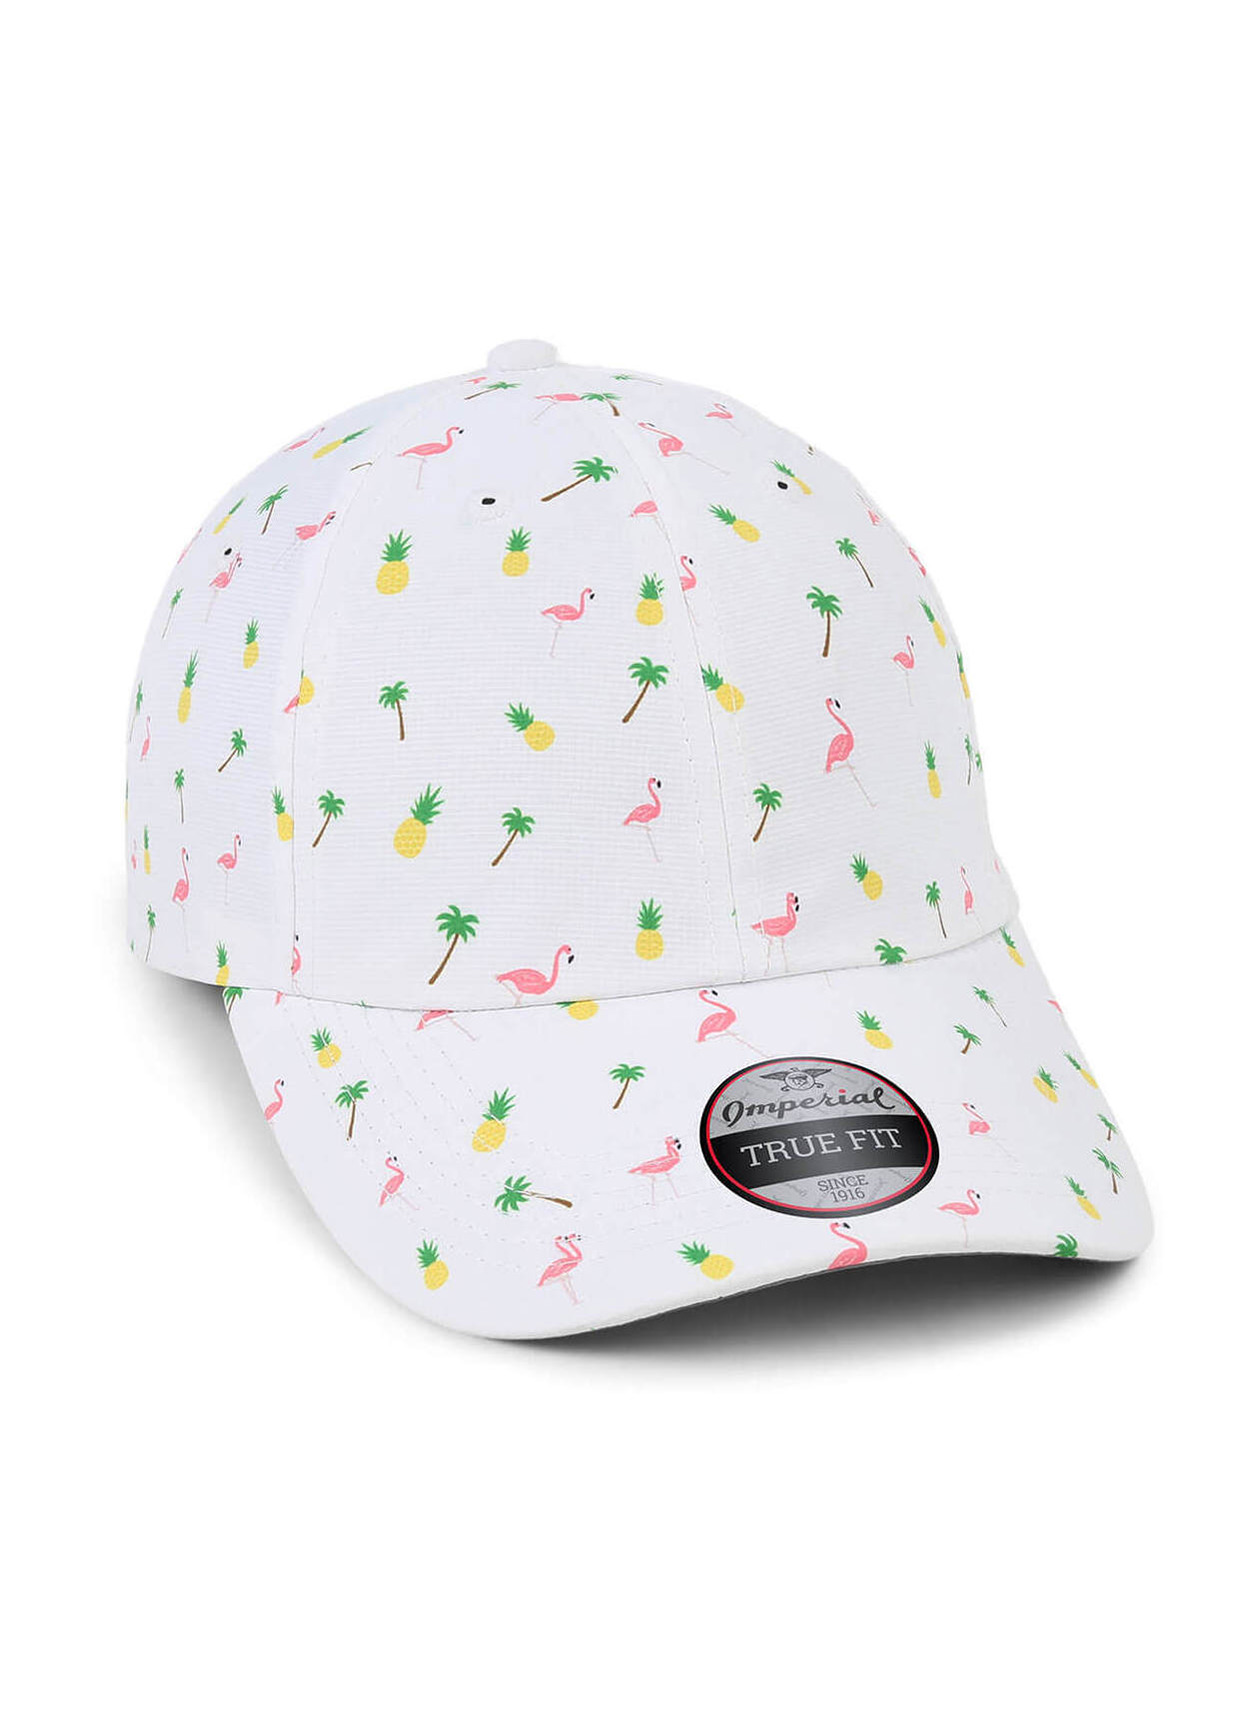 Imperial White / Tropical The Alter Ego Pattered Performance Hat